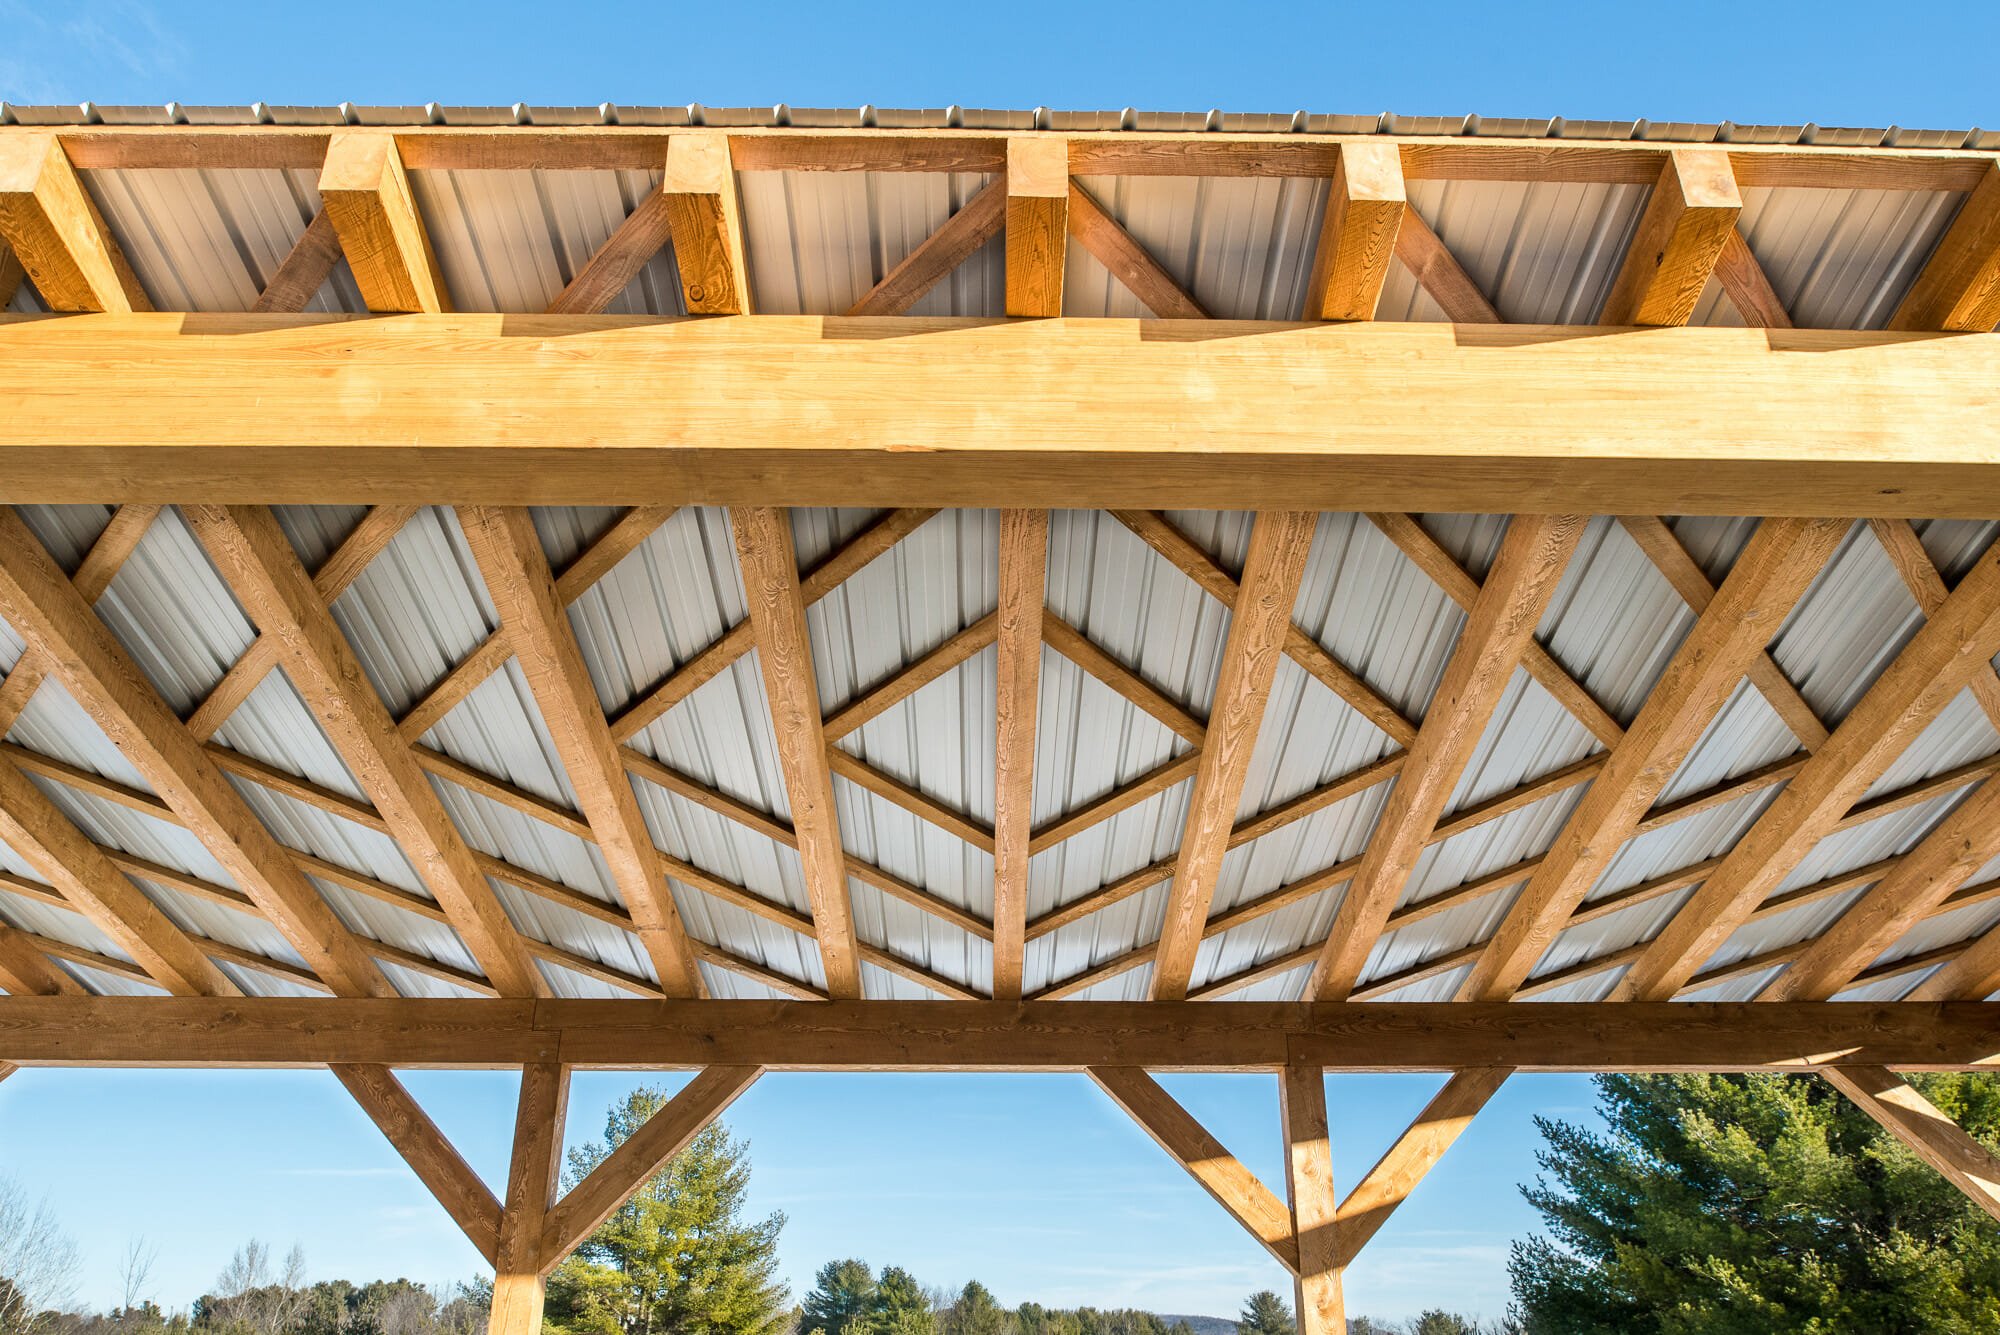 The above carport is a post and beam structure.